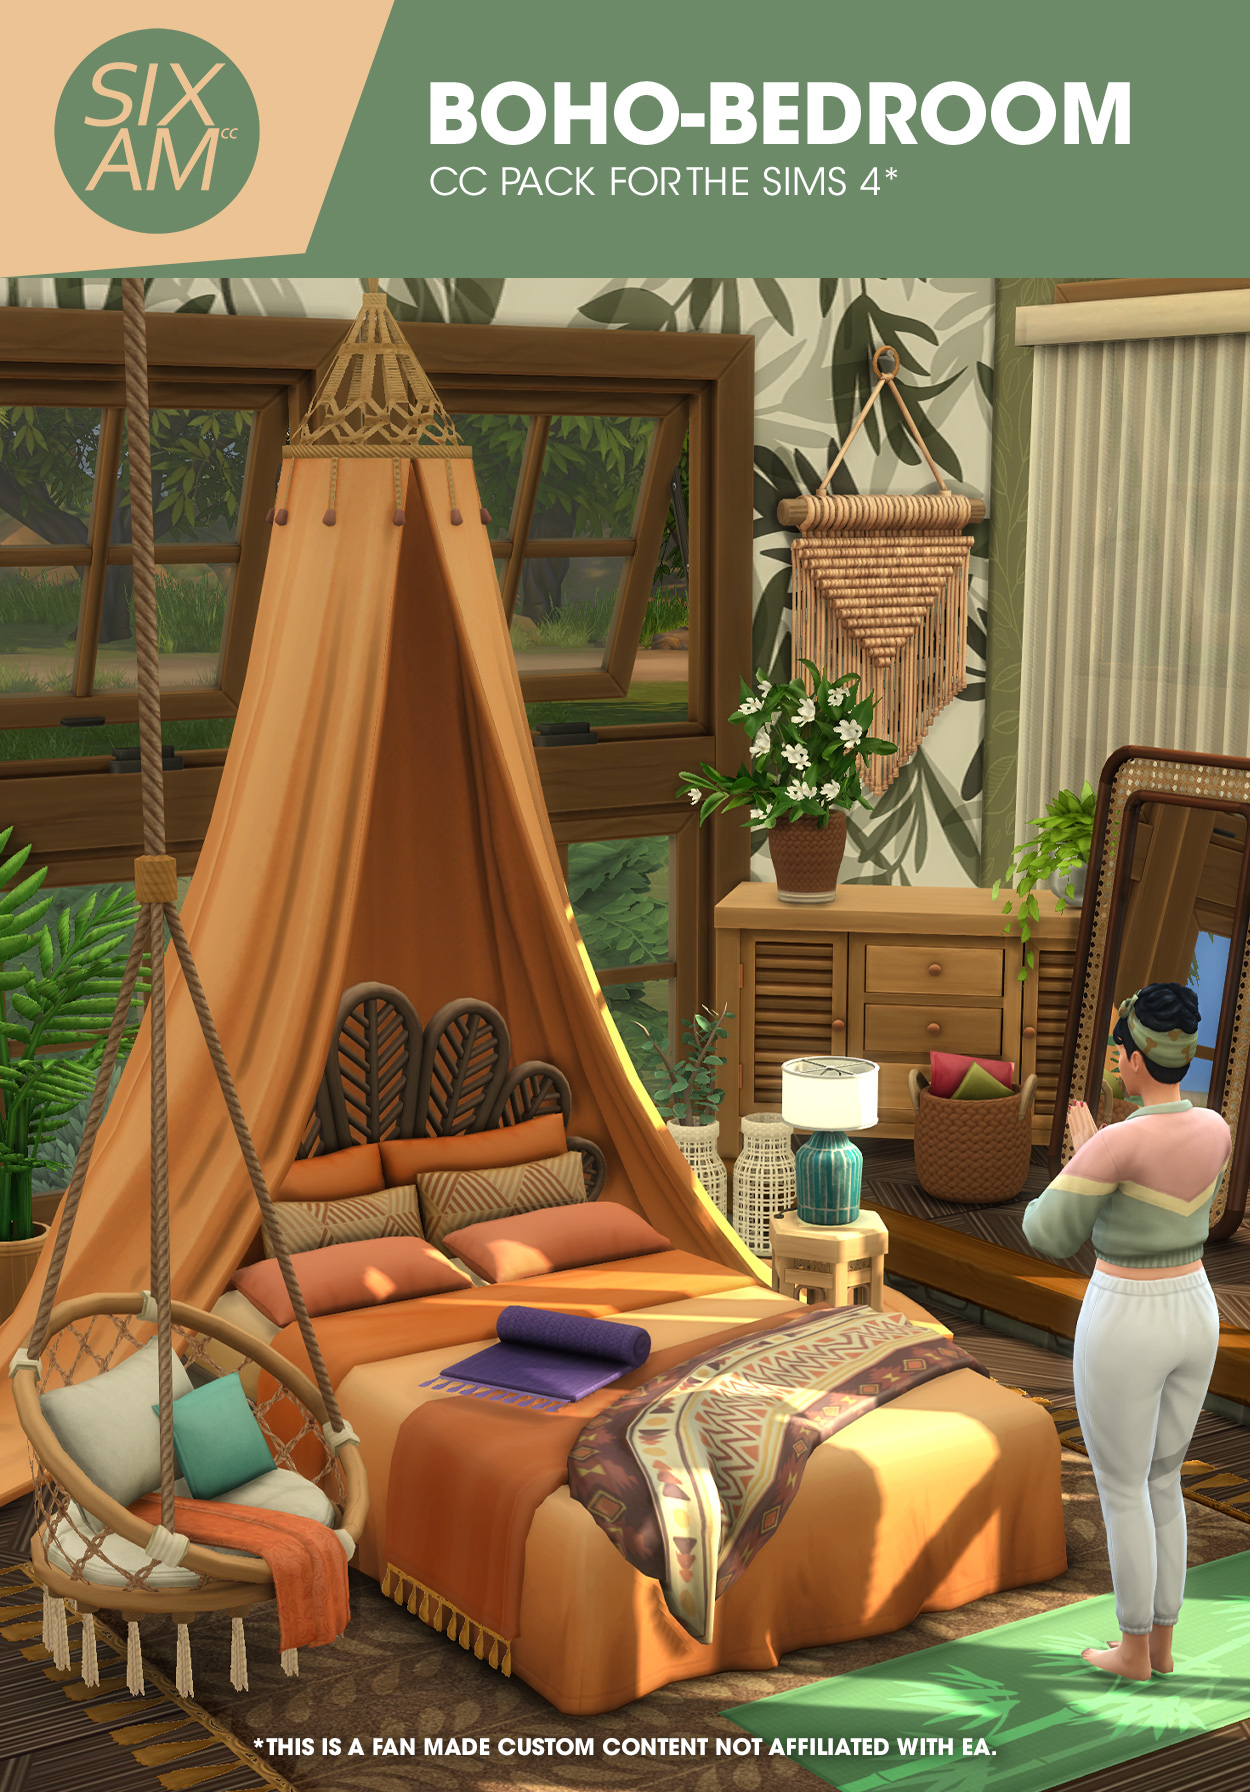 Boho Bedroom (CC Pack for The Sims 4)